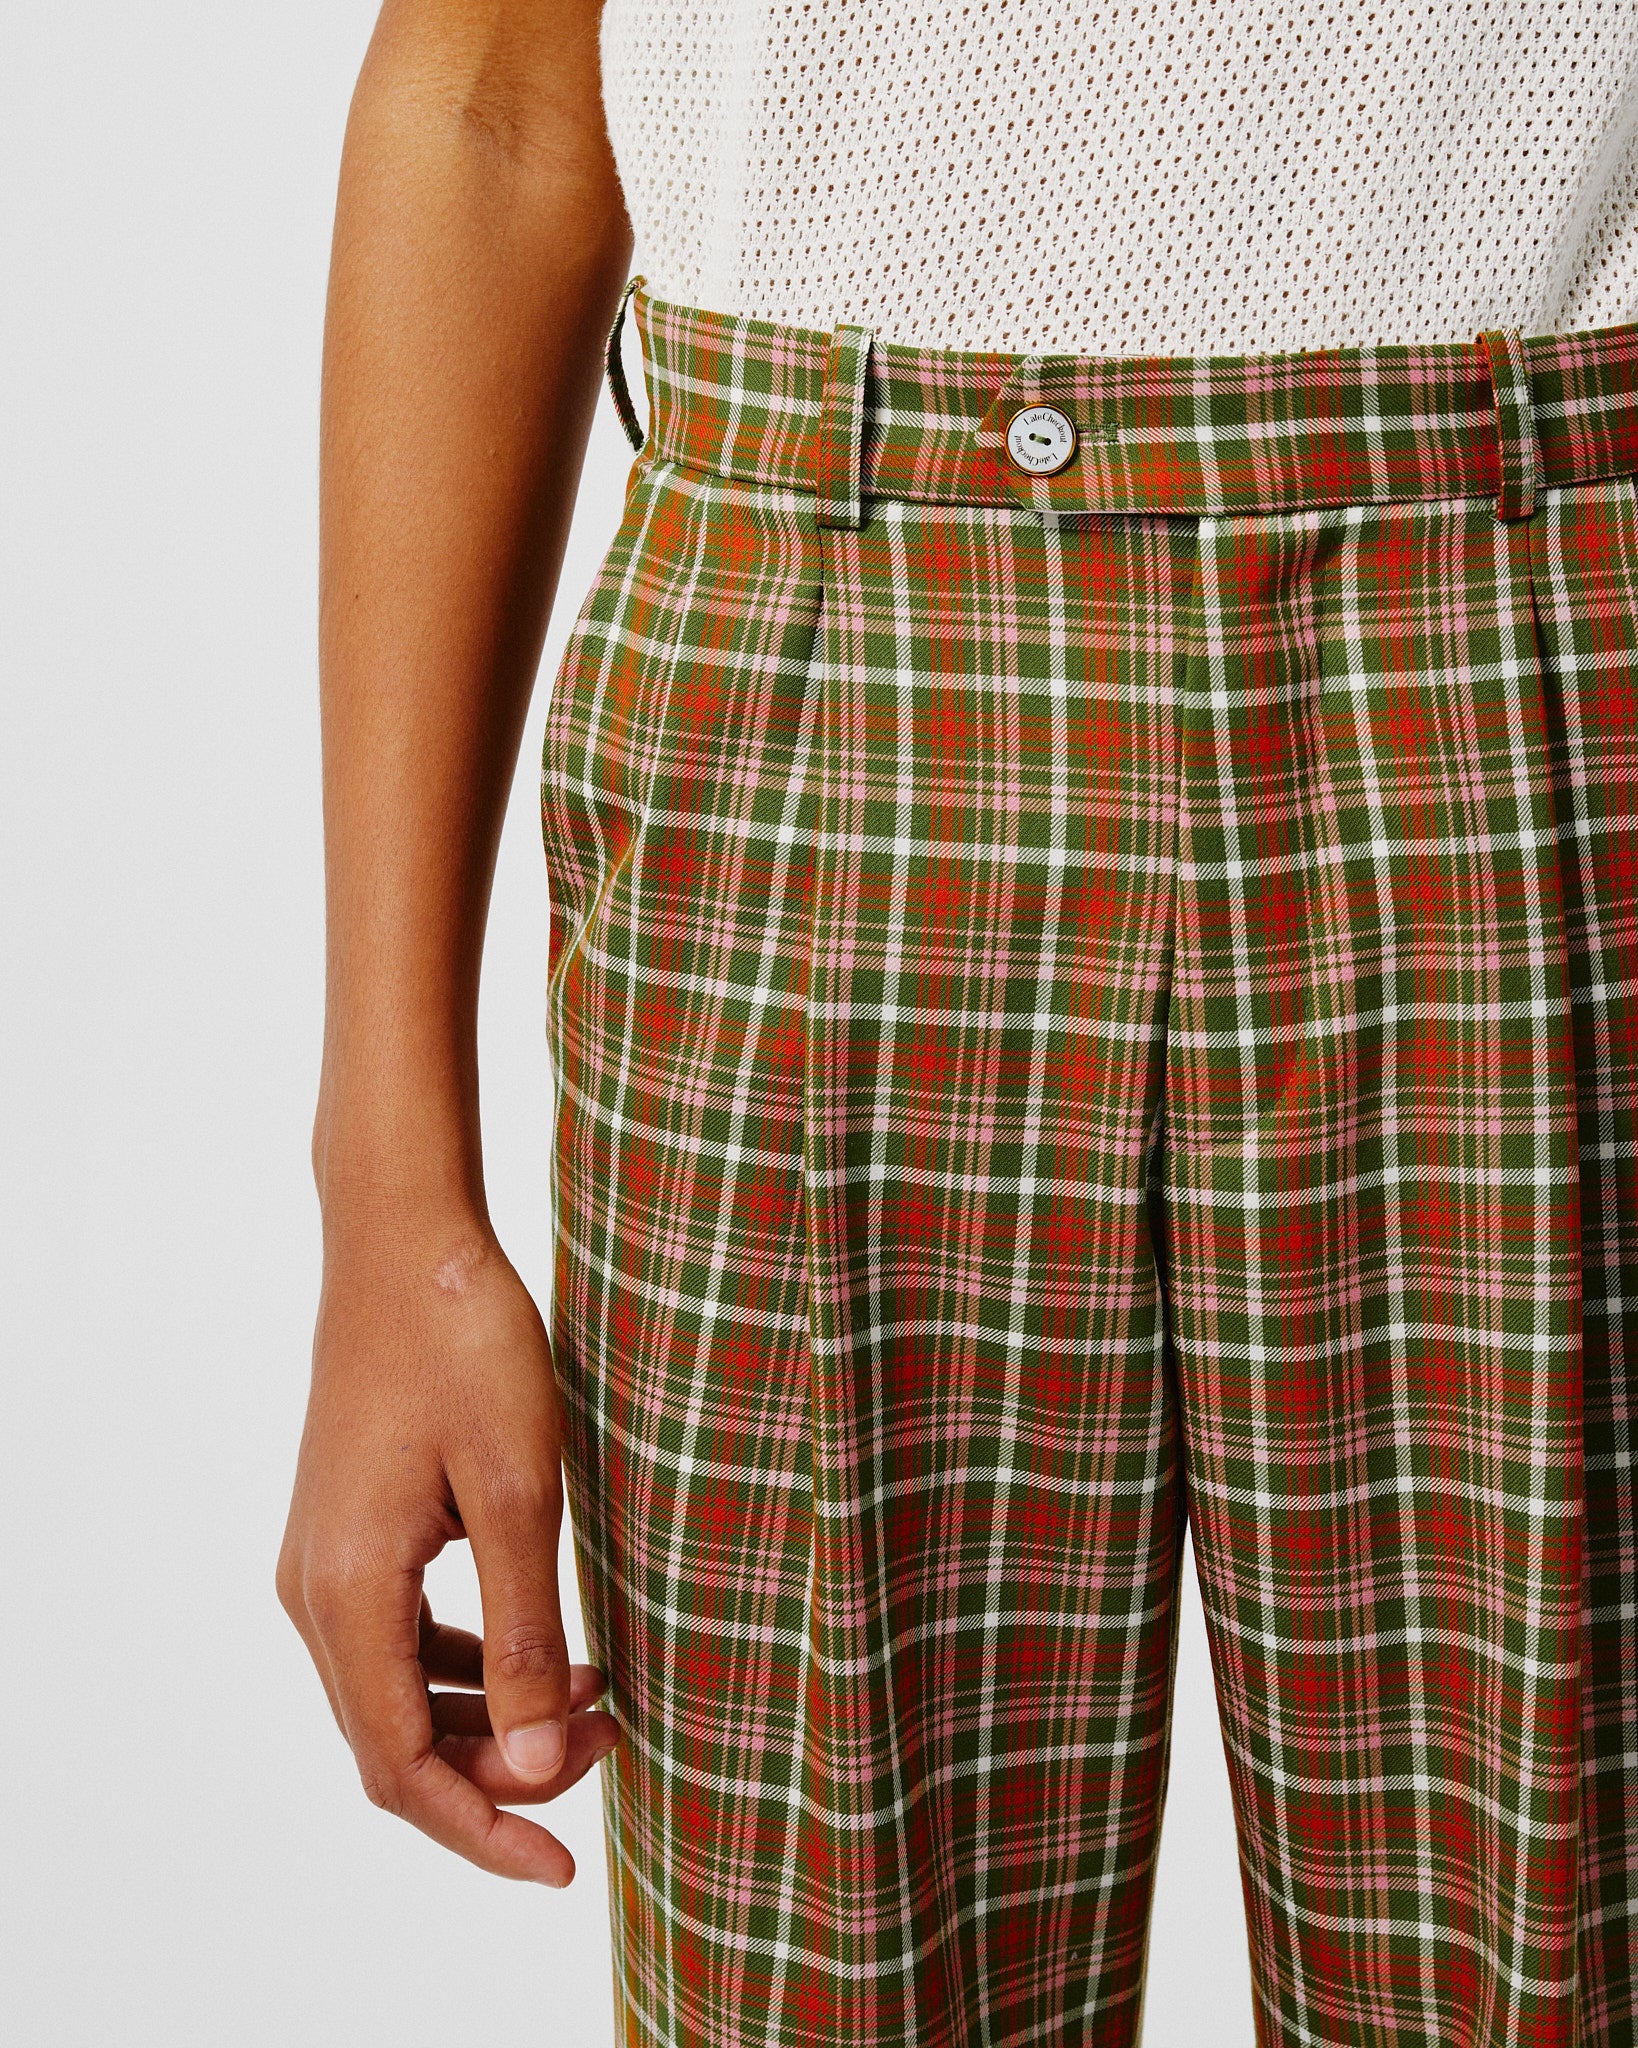 Green Checkered Trousers